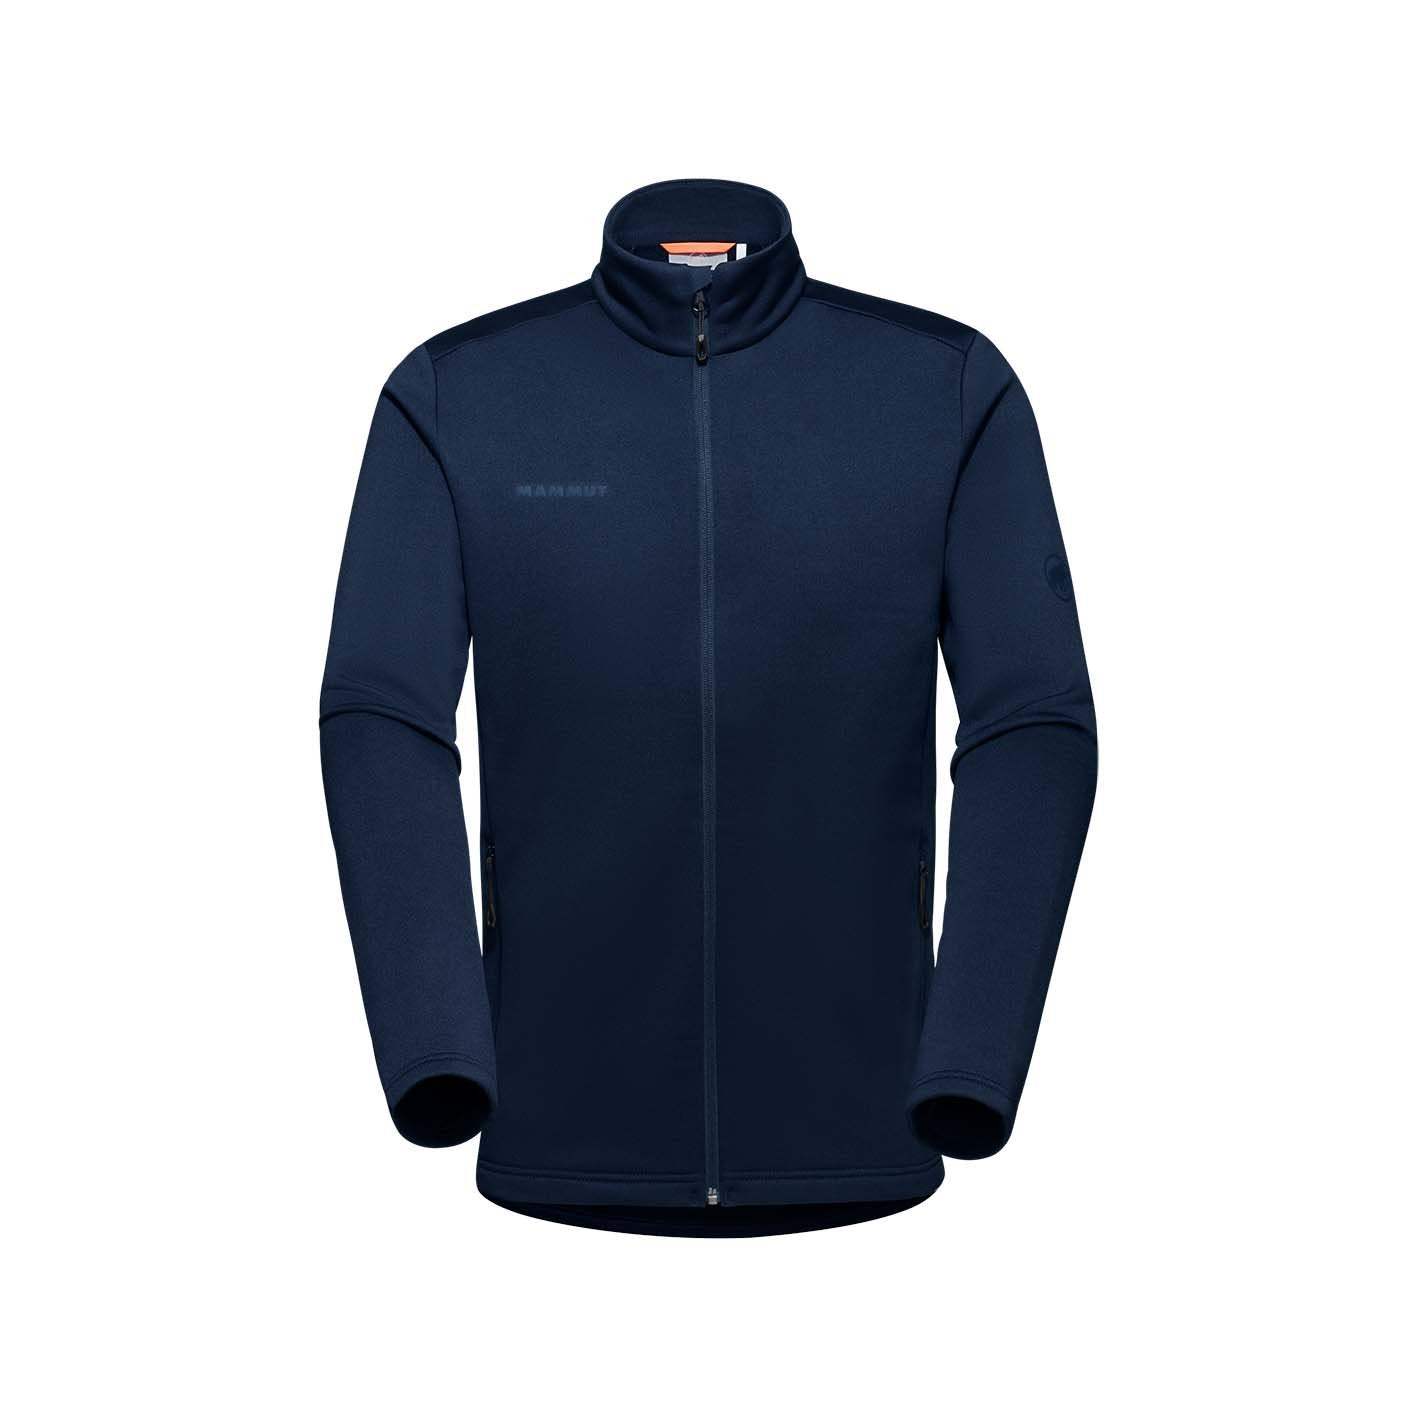 Men's Corporate Mid-Layer Jacket by Mammut - The Luxury Promotional Gifts Company Limited